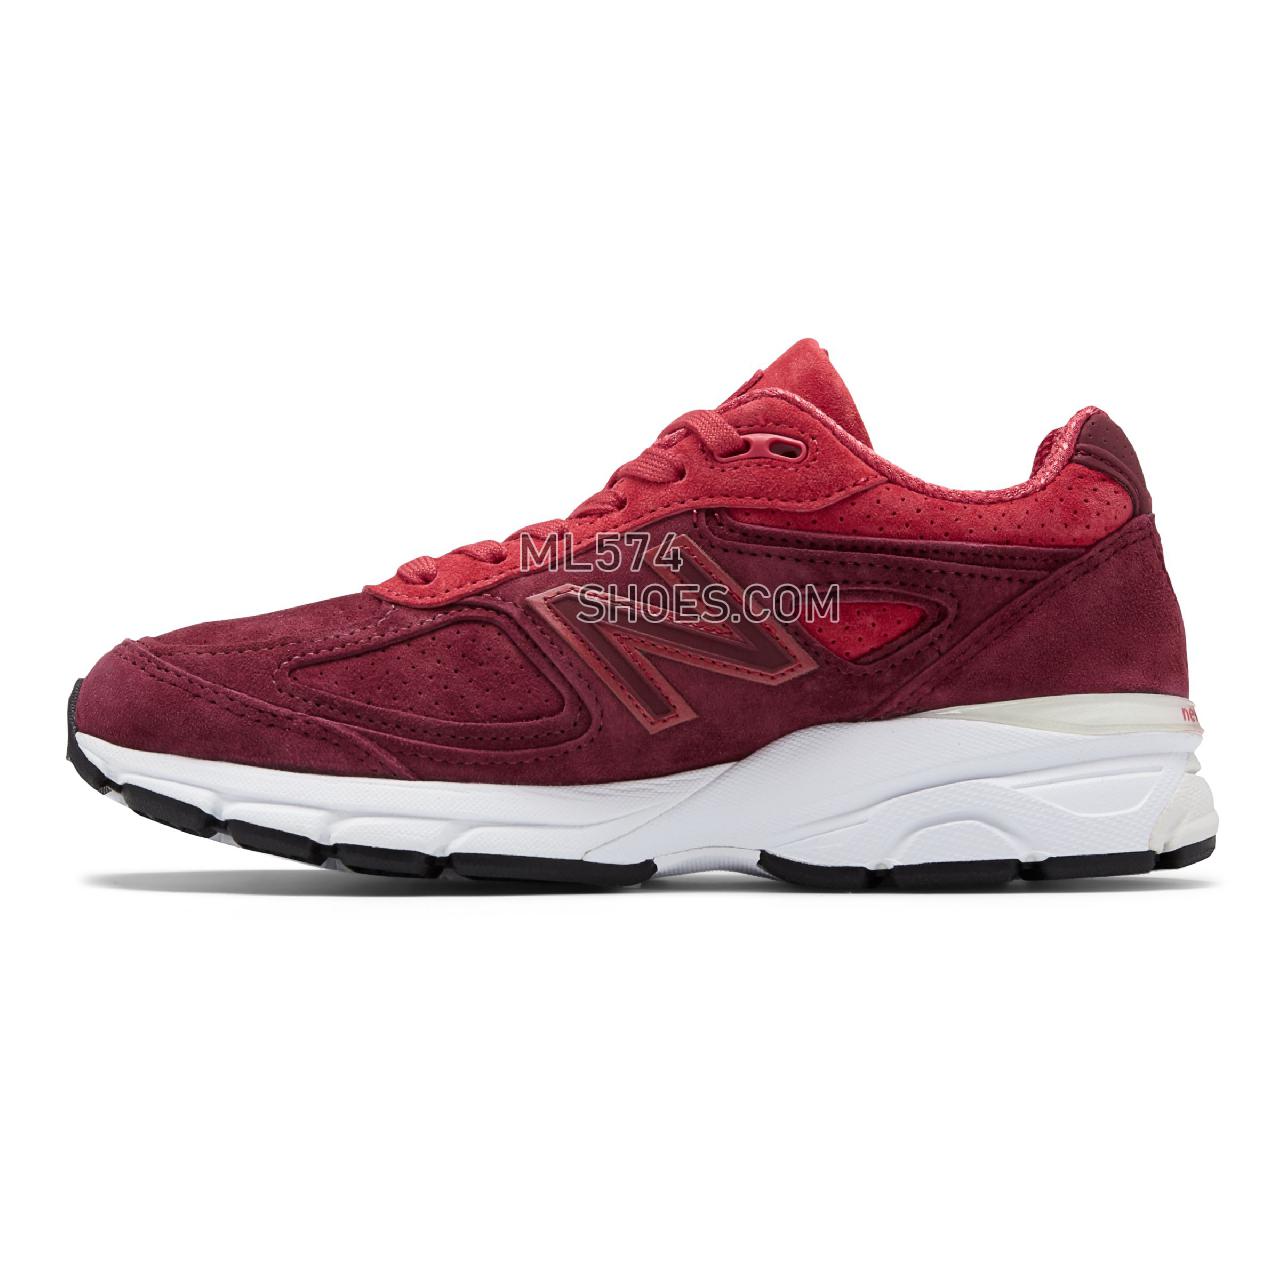 New Balance Womens 990v4 Made in US - Women's 990 - Running Vortex with Mercury Red - W990VT4